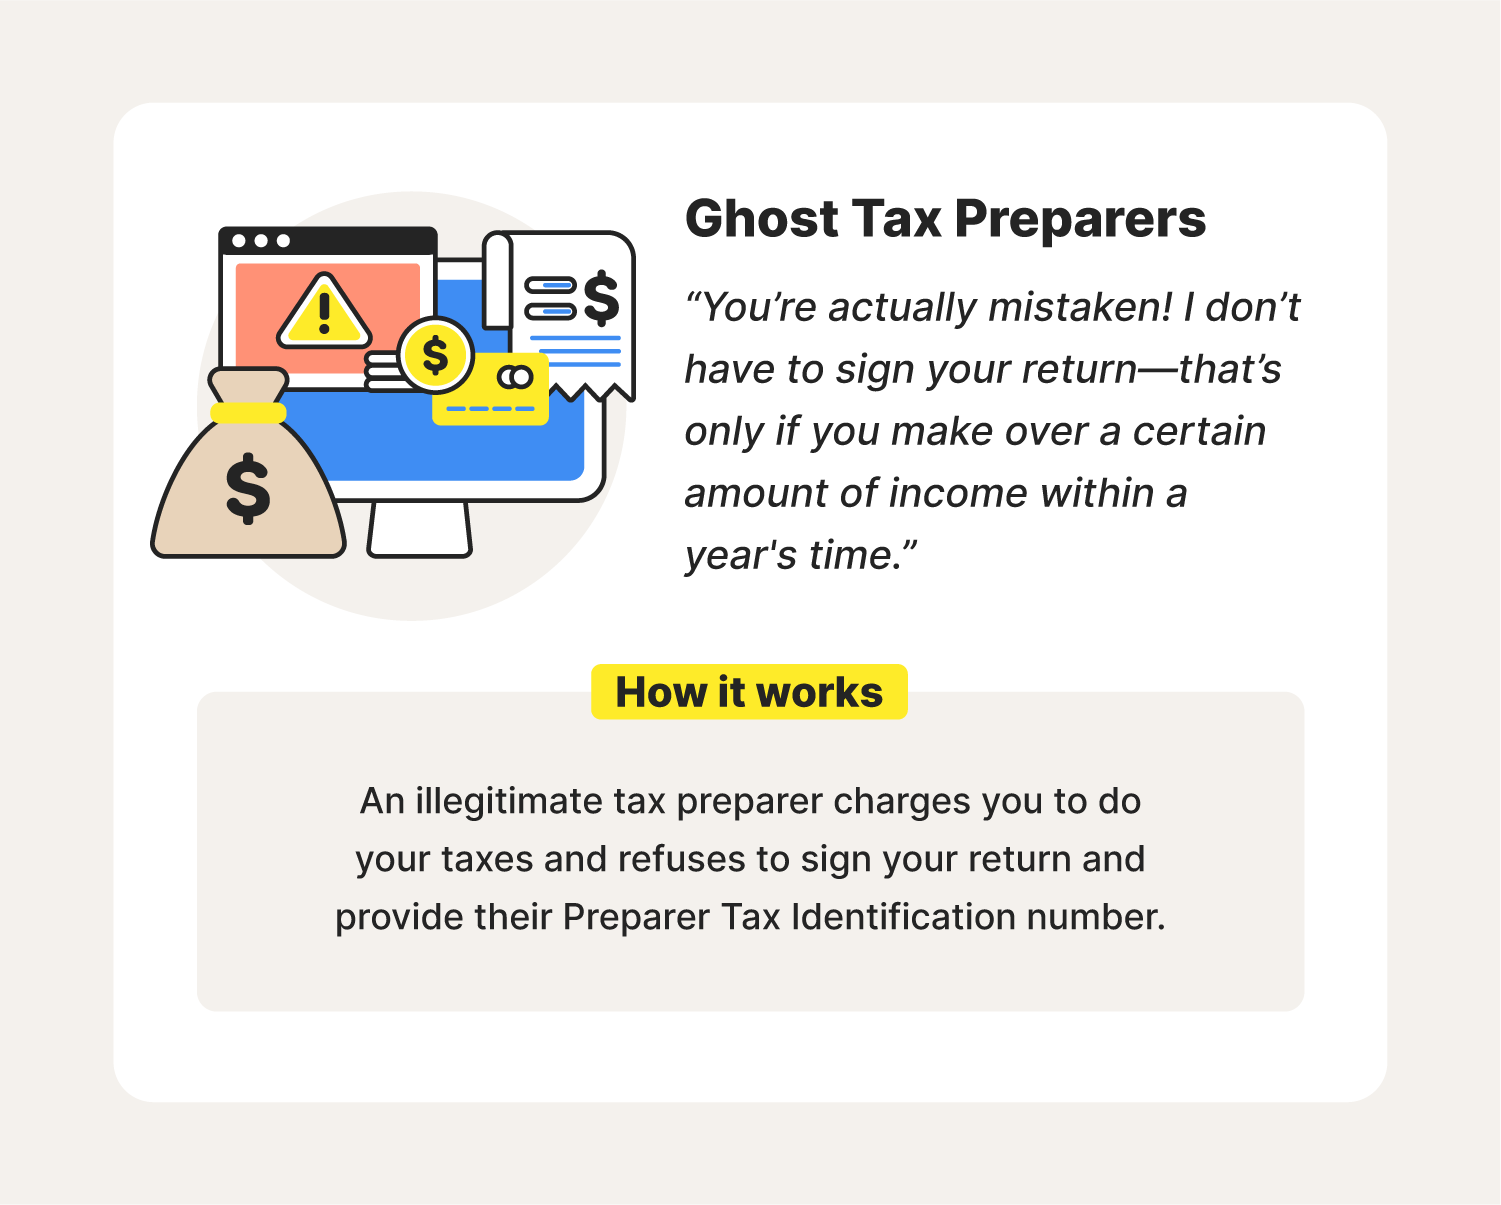 An illustration accompanies an explanation of how a ghost tax preparer scam works in order to show the true dangers of IRS scams.